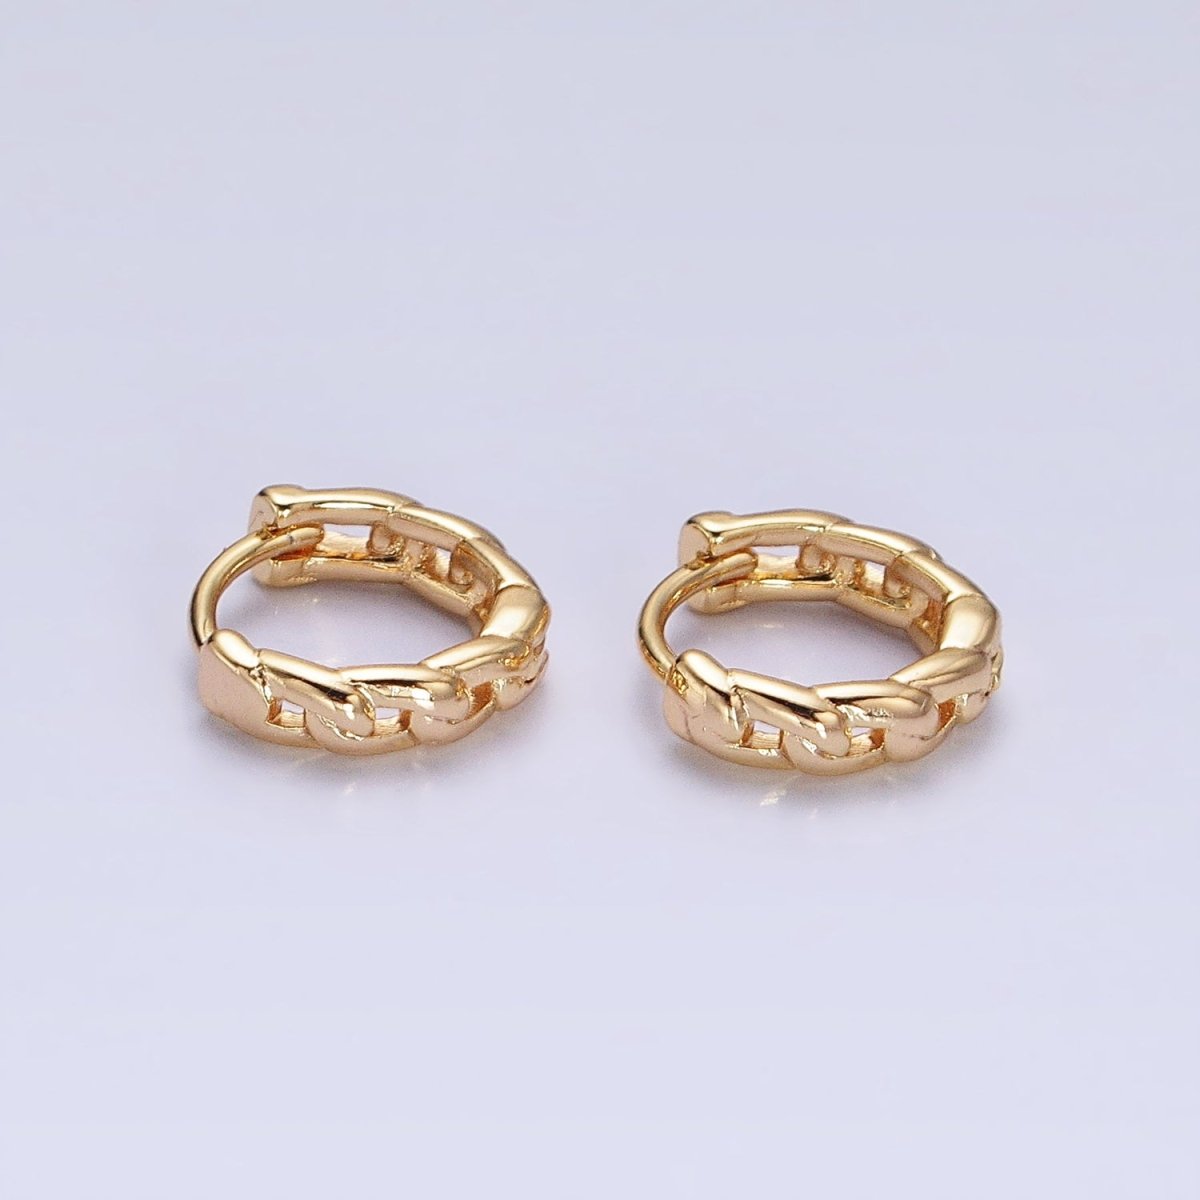 Dainty Gold Curb Link Chain Earring Minimalist Huggie Earring for Everyday Use AB666 - DLUXCA